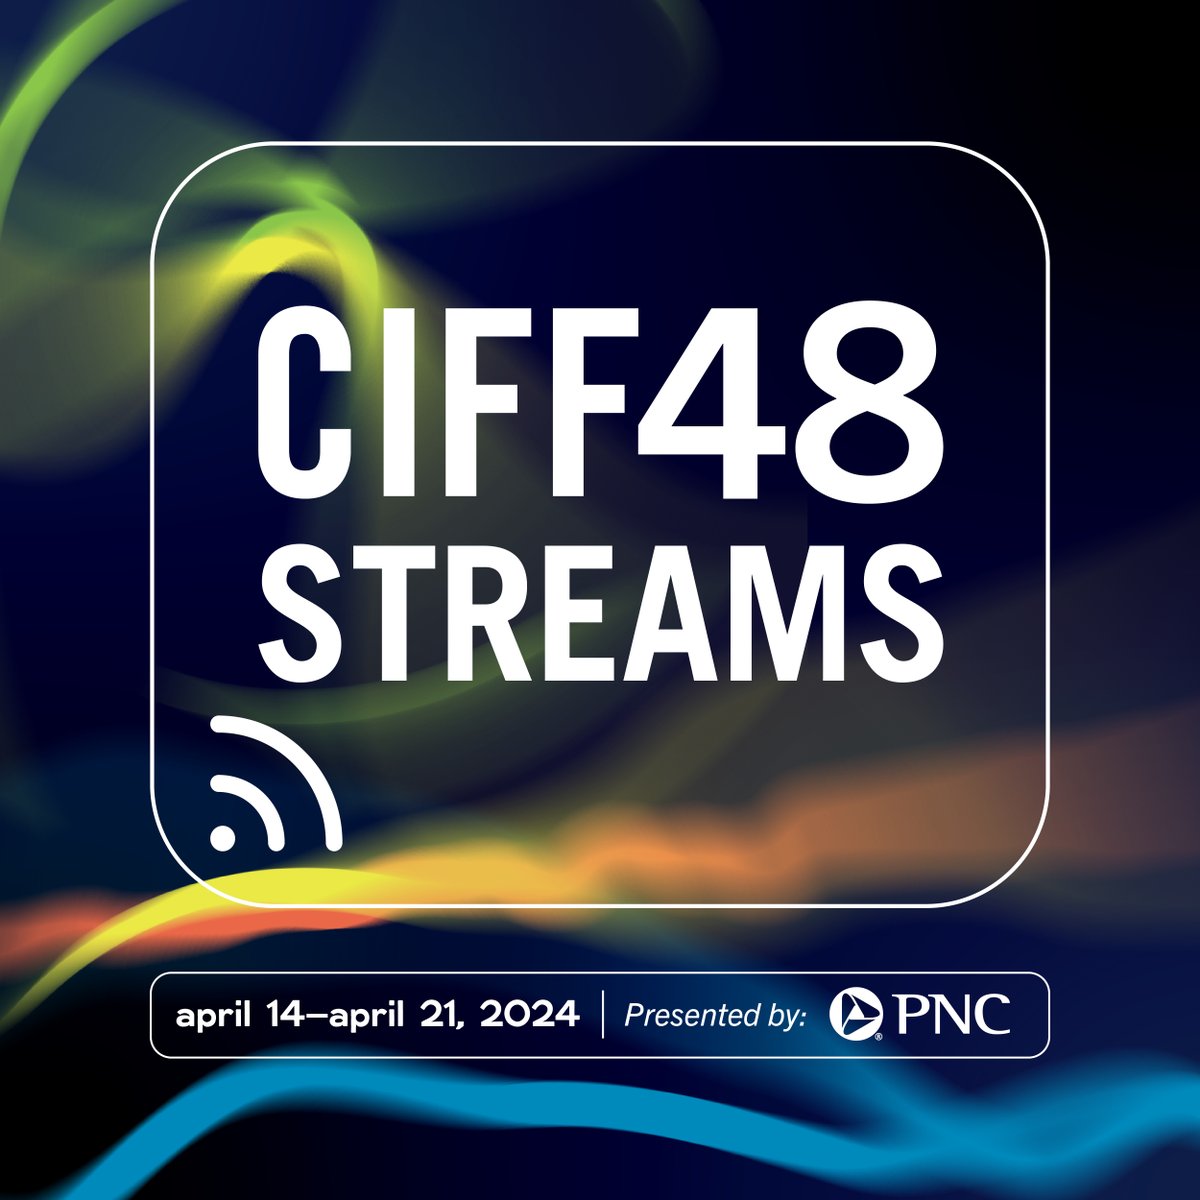 After we wrap the Festival @PlayhouseSquare, join us for #CIFF48Streams, Presented by @pncbank, April 14th-21st! Streaming tickets are now on sale. For our binge-watchers, check out the Streams Passholder membership to access hundreds of CIFF48 films! clevelandfilm.org/store/membersh…